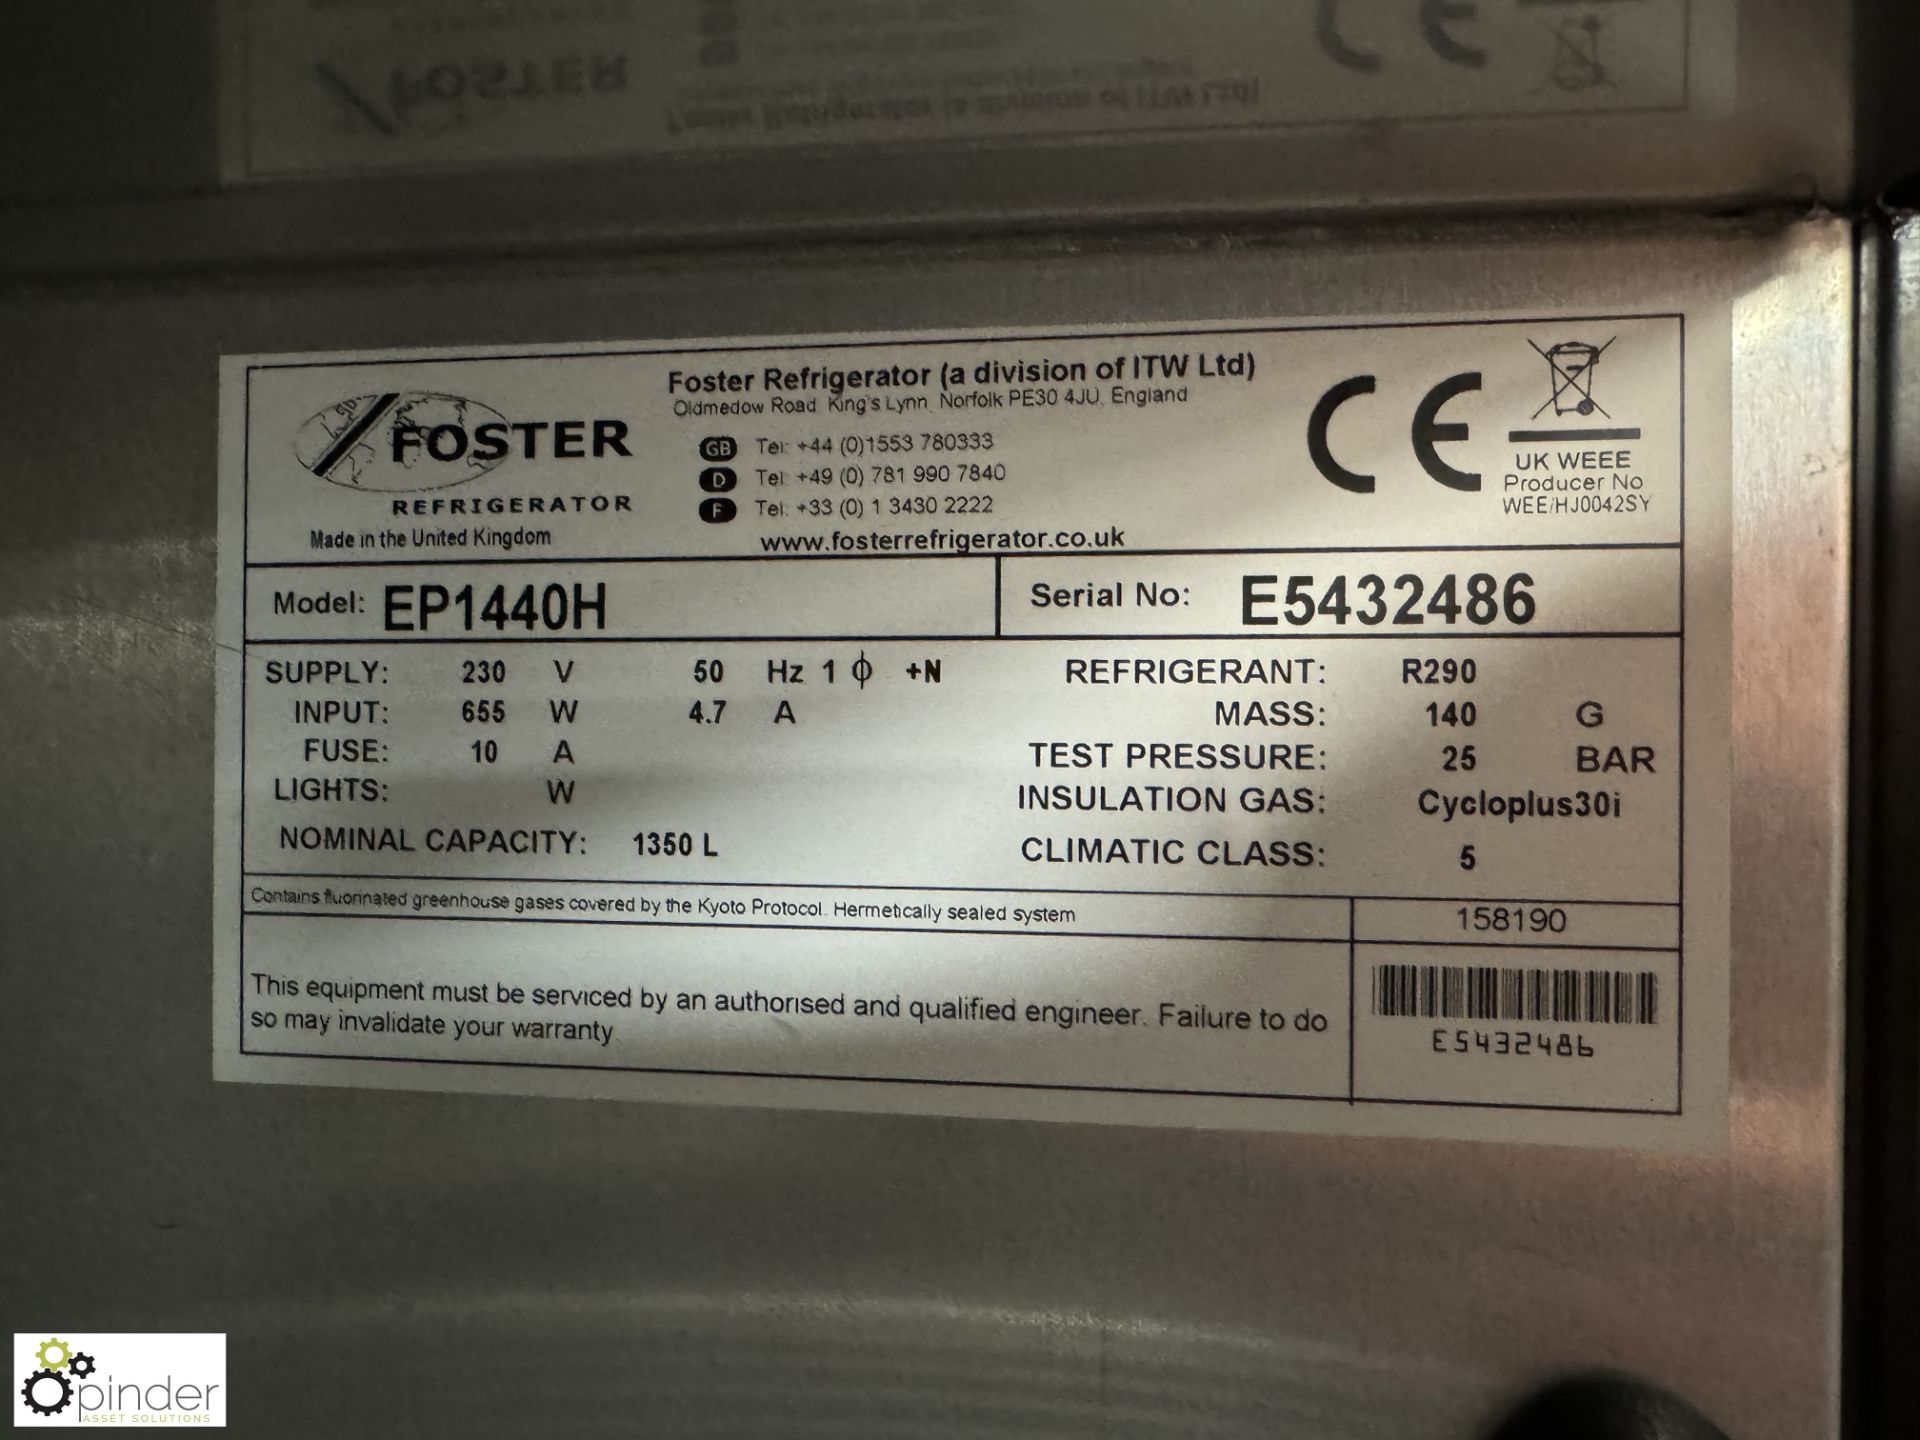 Foster Eco Pro G2 EP1440H stainless steel mobile double door Fridge (location in building – basement - Image 5 of 7